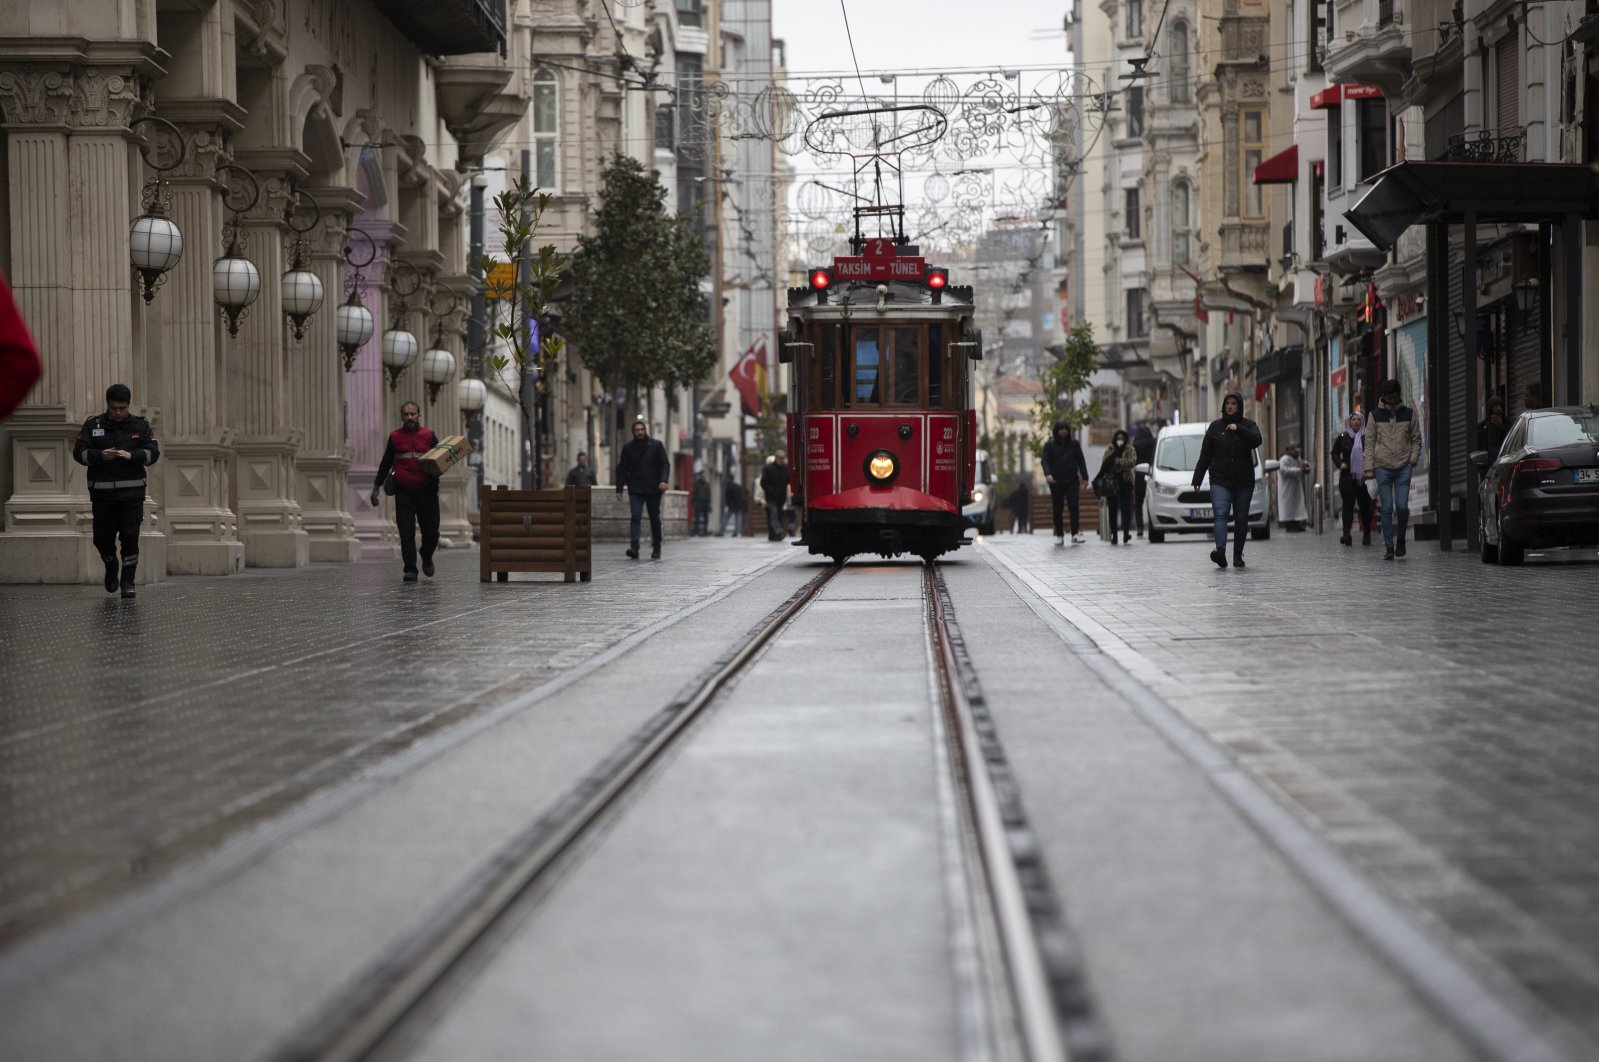 A few people can be seen walking on the usually bustling Istiklal Street which looks eerily empty over coronavirus concerns in Istanbul, Turkey, Tuesday, 24 March 2020. (EPA-EFE Photo)